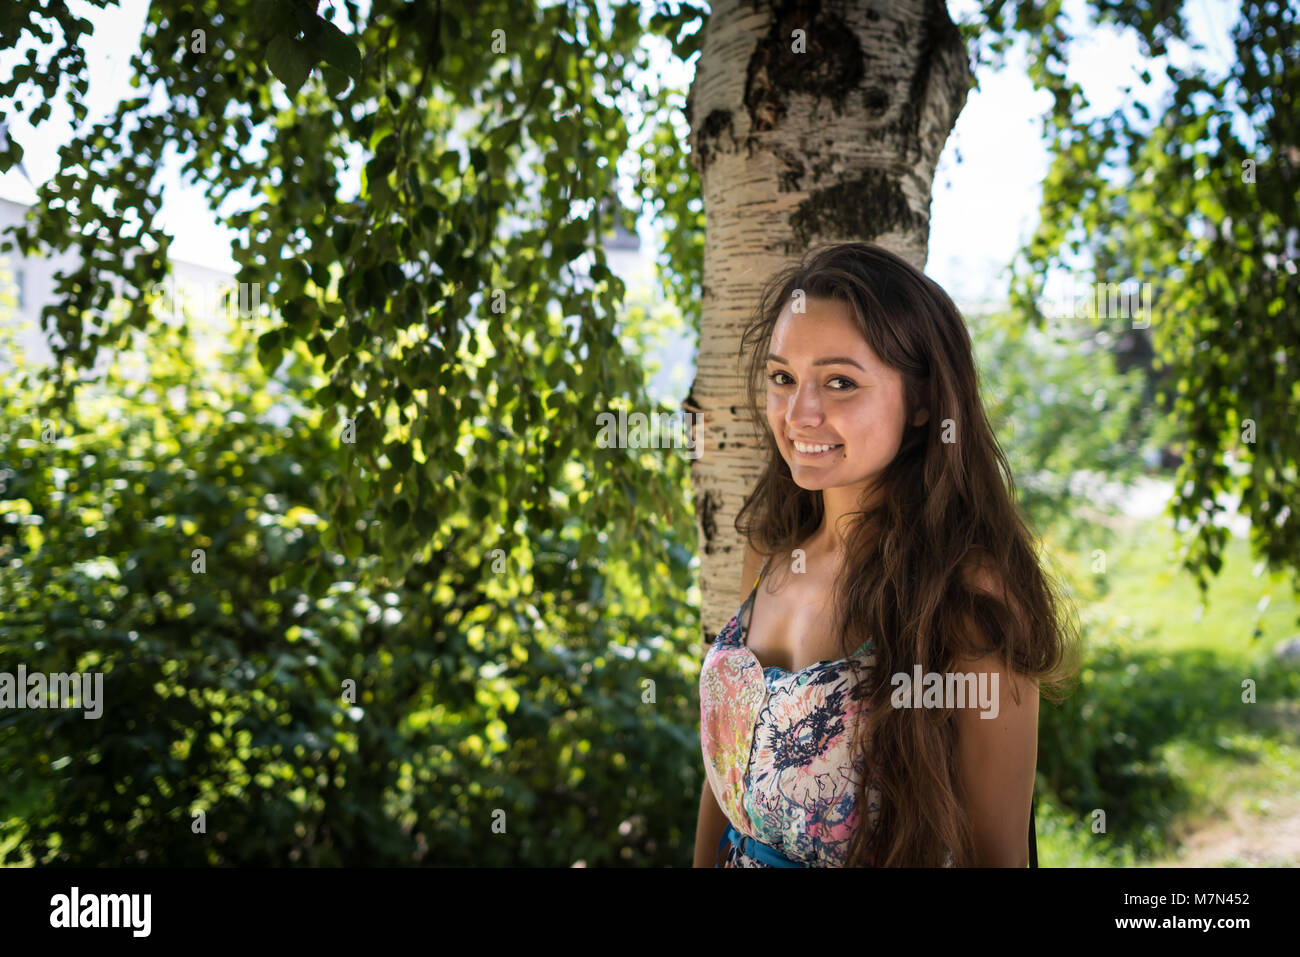 Young woman stands near tree in park on background of green leaves with sun rays. Cheerful girl is smiling under birch in warm summer day Stock Photo